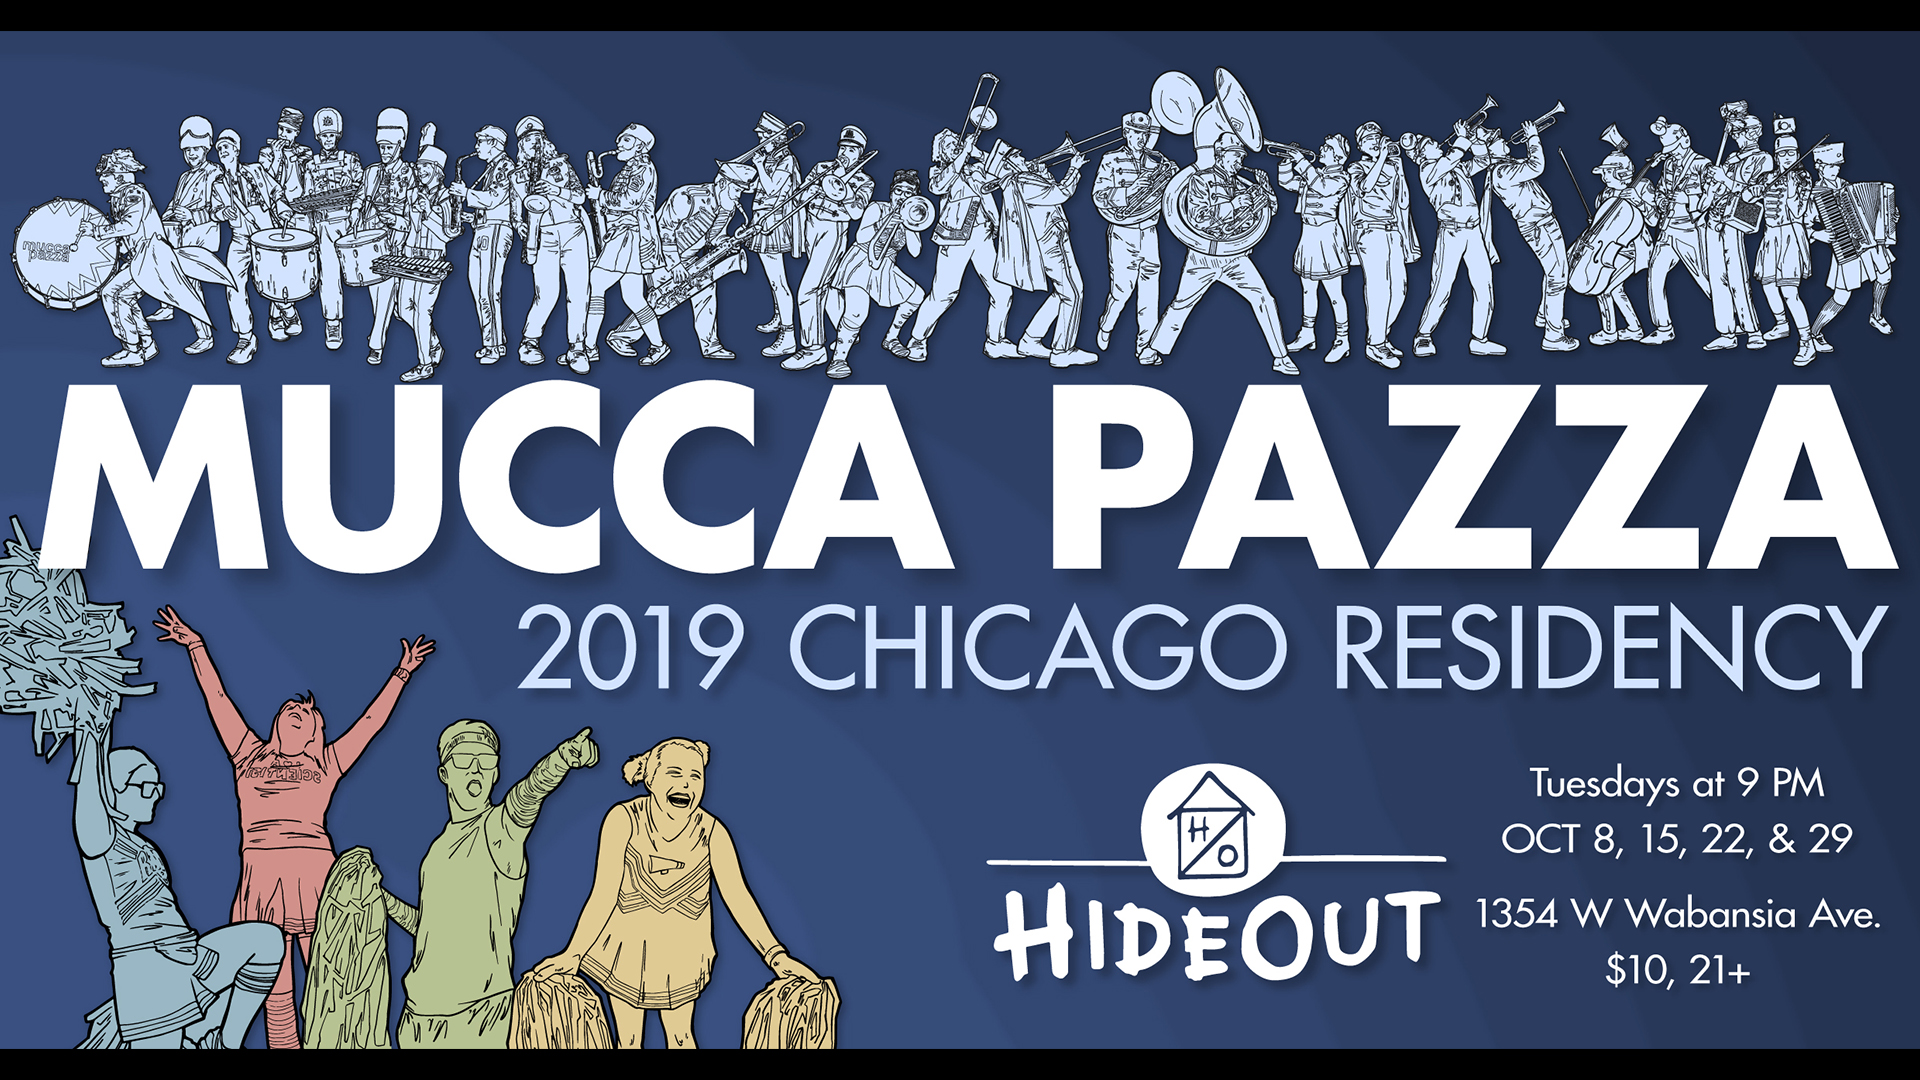 Mucca Pazza’s 2019 Chicago Residency Banner Ad